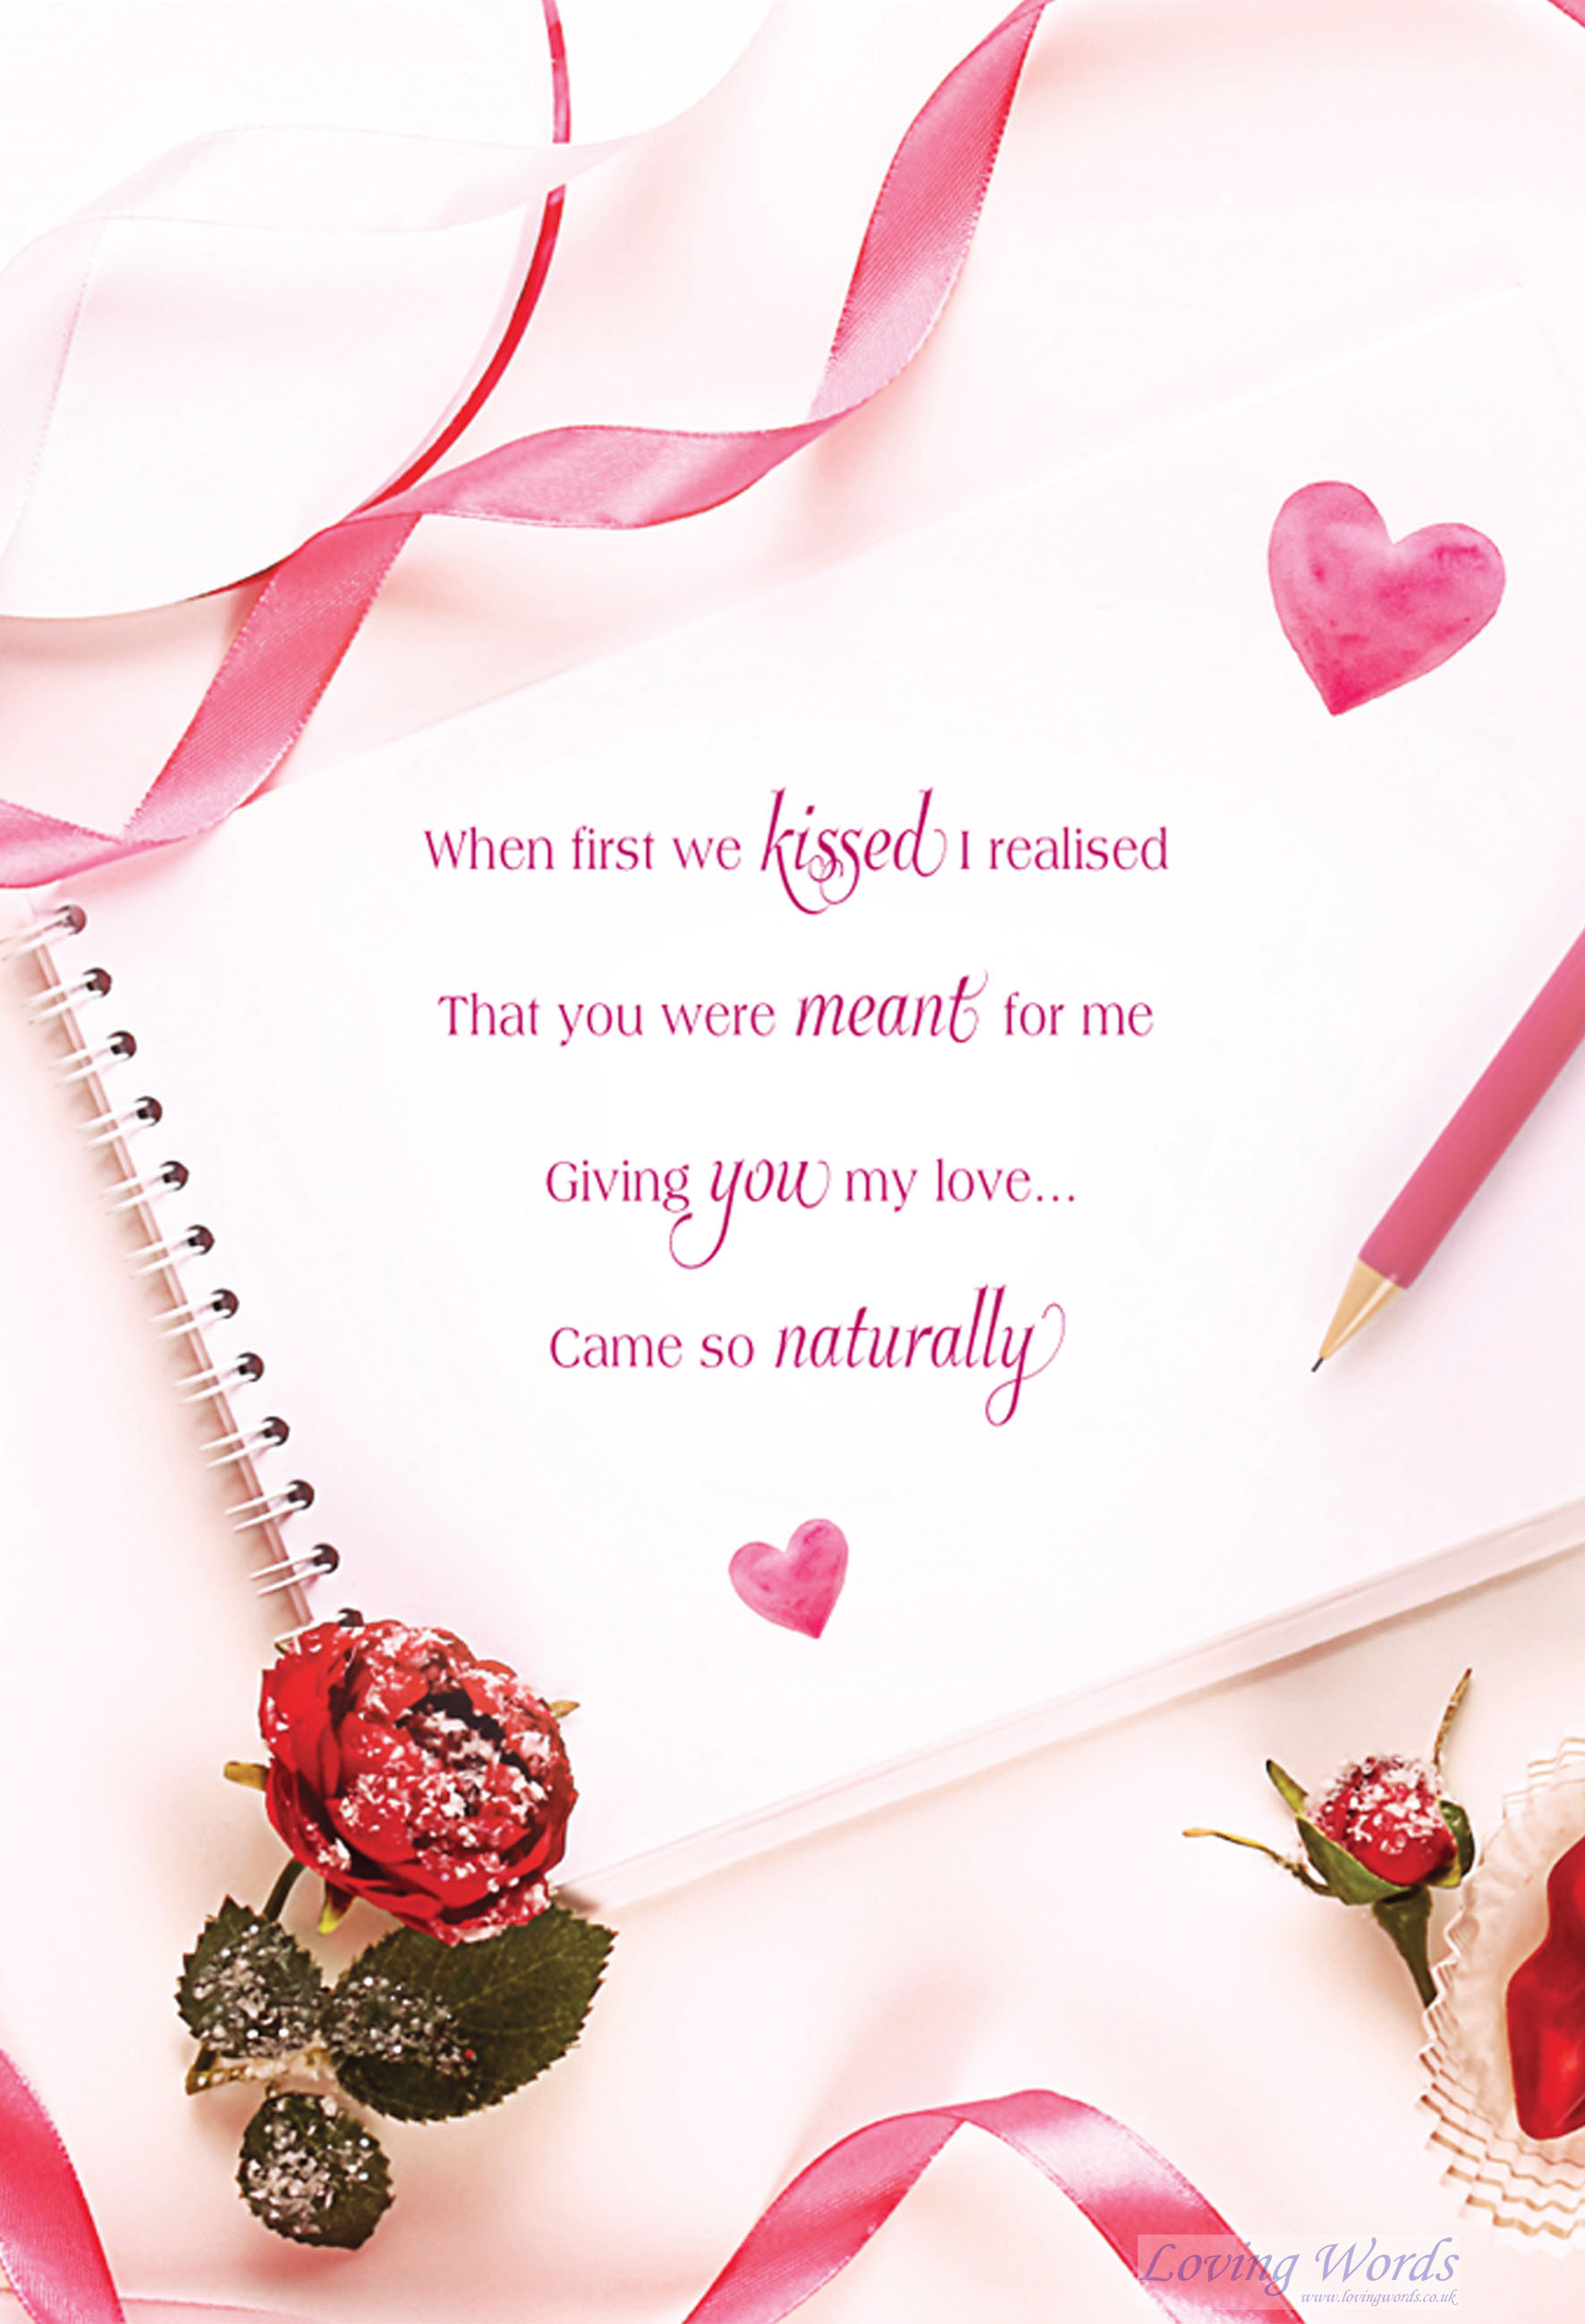 With Love To My Wife On Valentines Day Greeting Cards By Loving Words